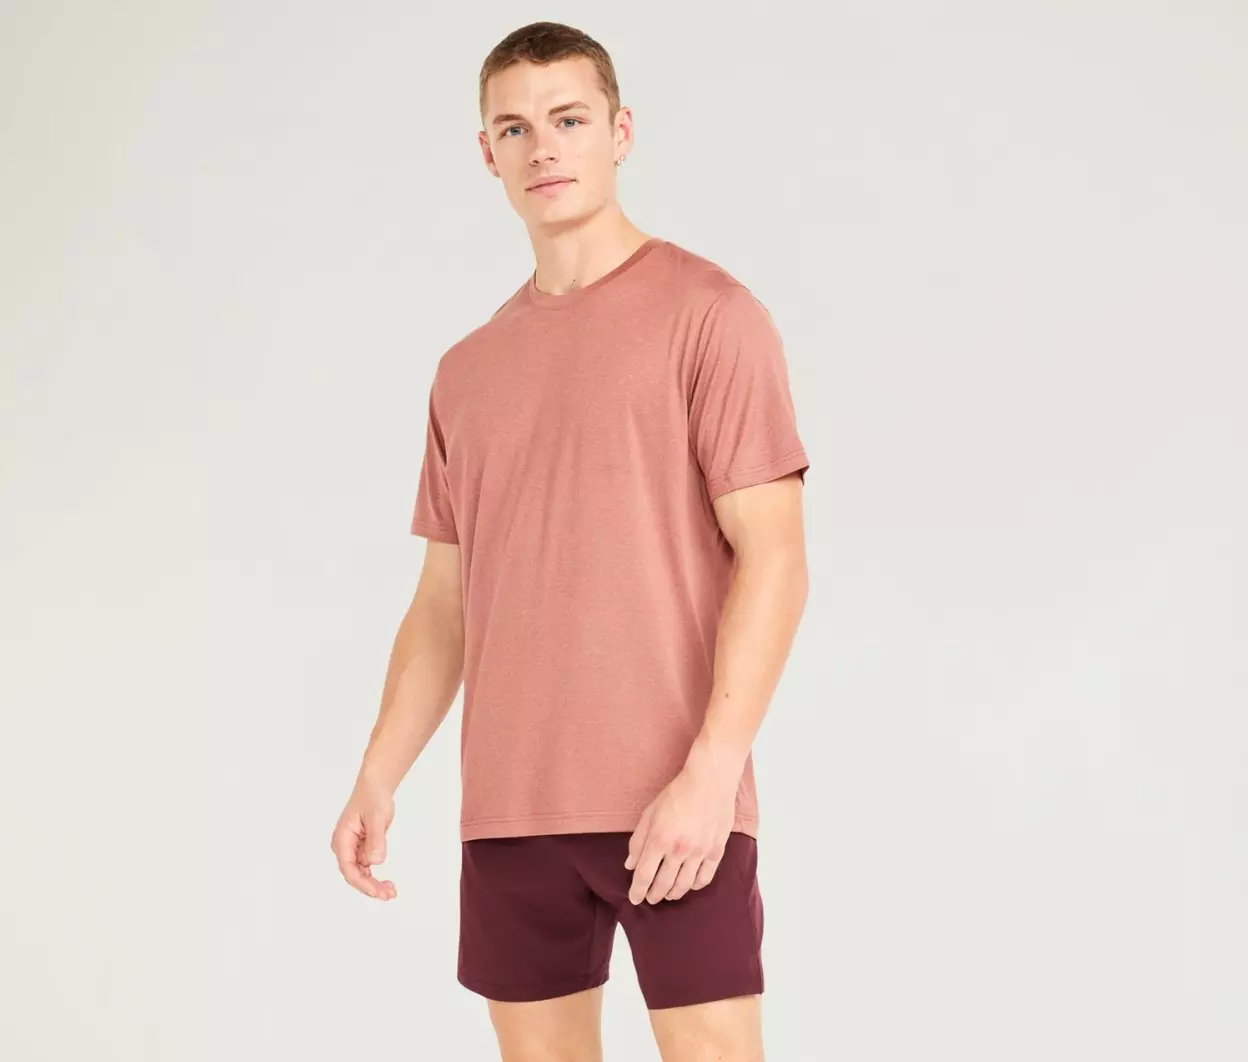 A male model wears a mauve active shirt and maroon shorts.